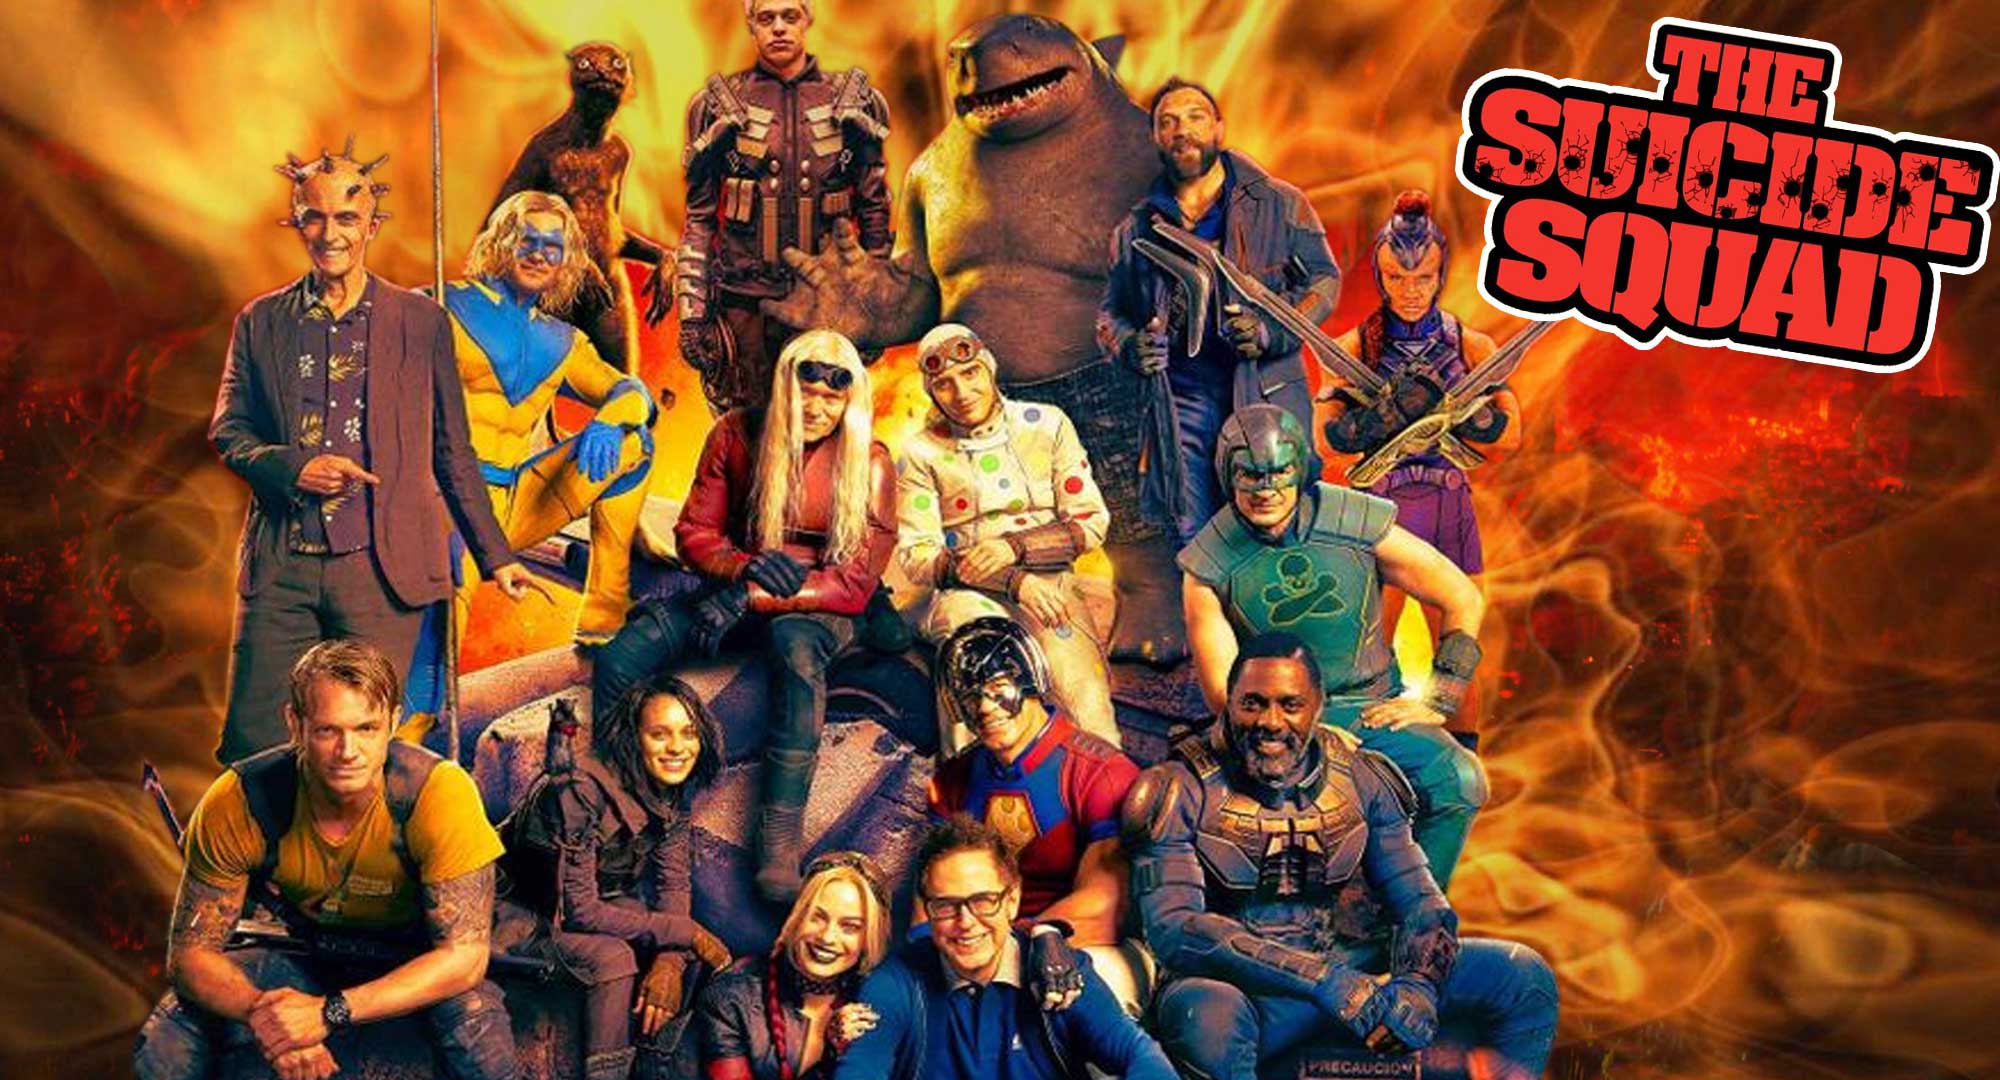 Who Are All The People In The Suicide Squad Cast Photo?